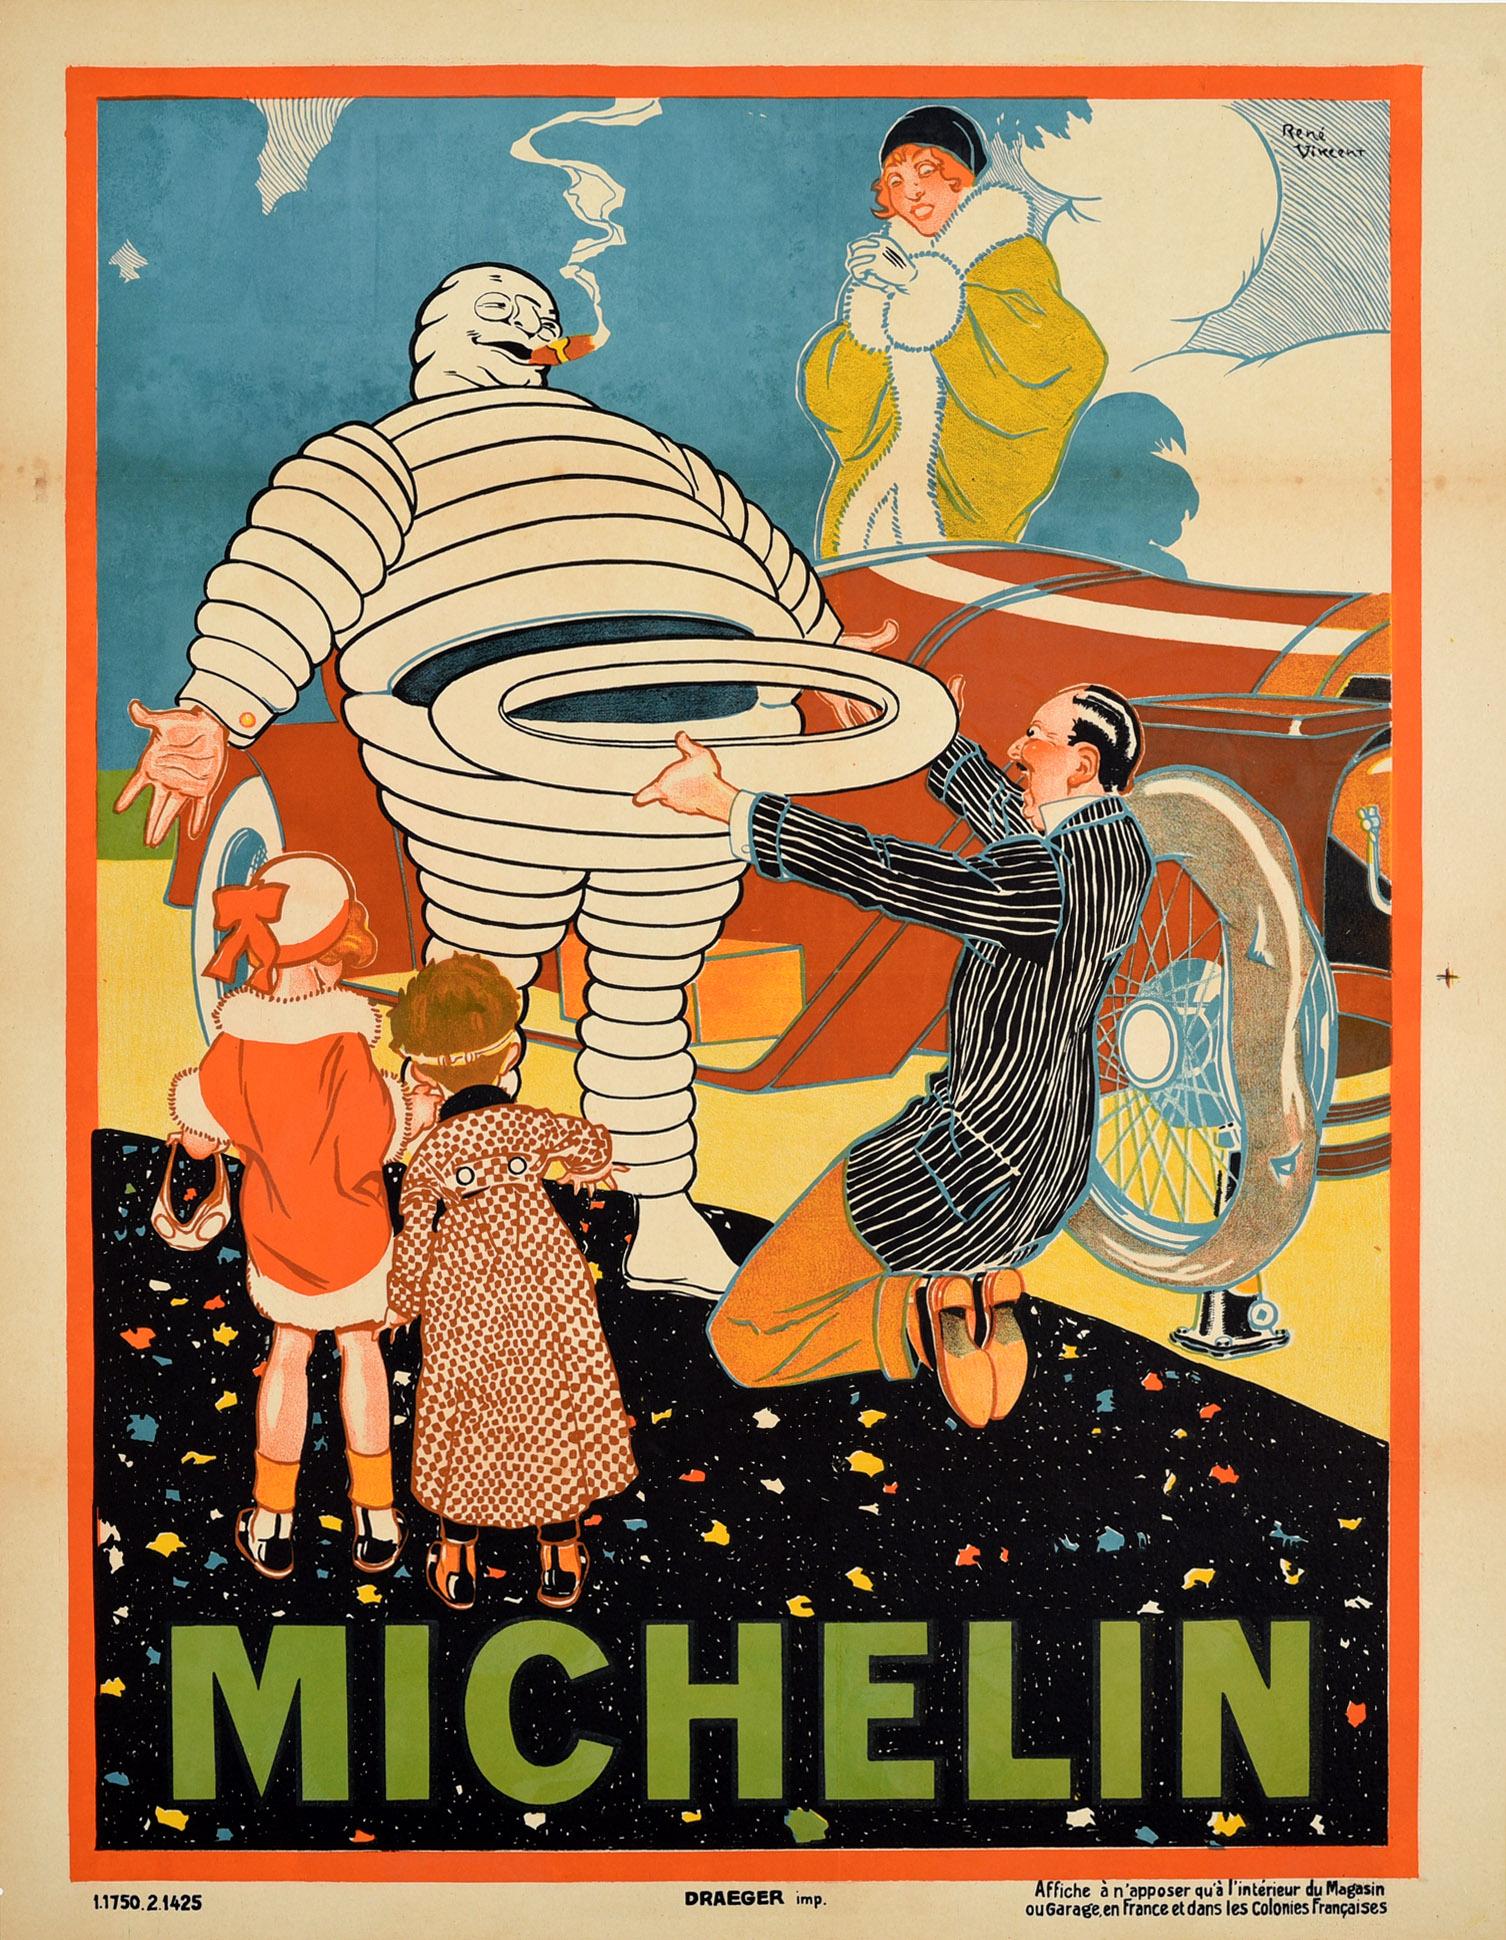 Vintage car tyres advert poster reproduction. Michelin 1925 